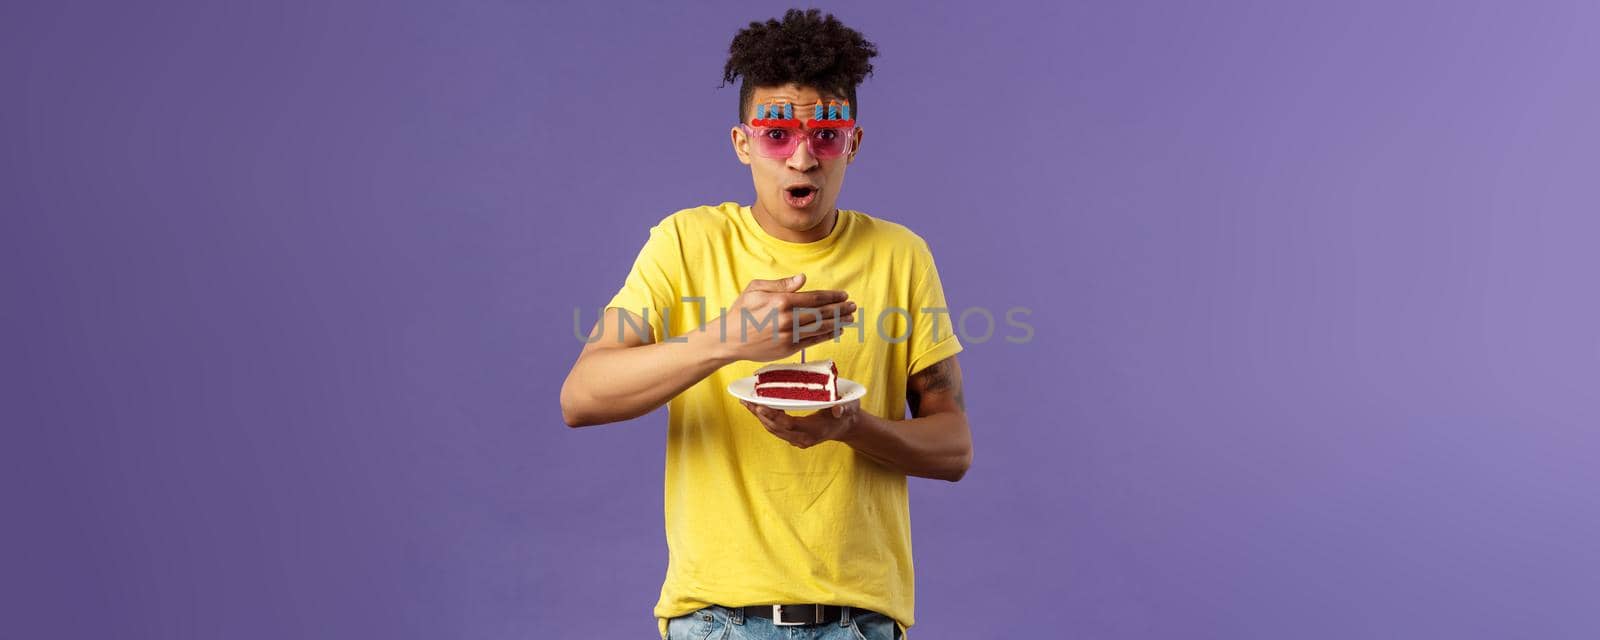 Celebration, party and holidays concept. Portrait of happy funny, enthusiastic young man celebrating birthday, protect lit candle on b-day cake from wind, making wish, smiling cheerful.